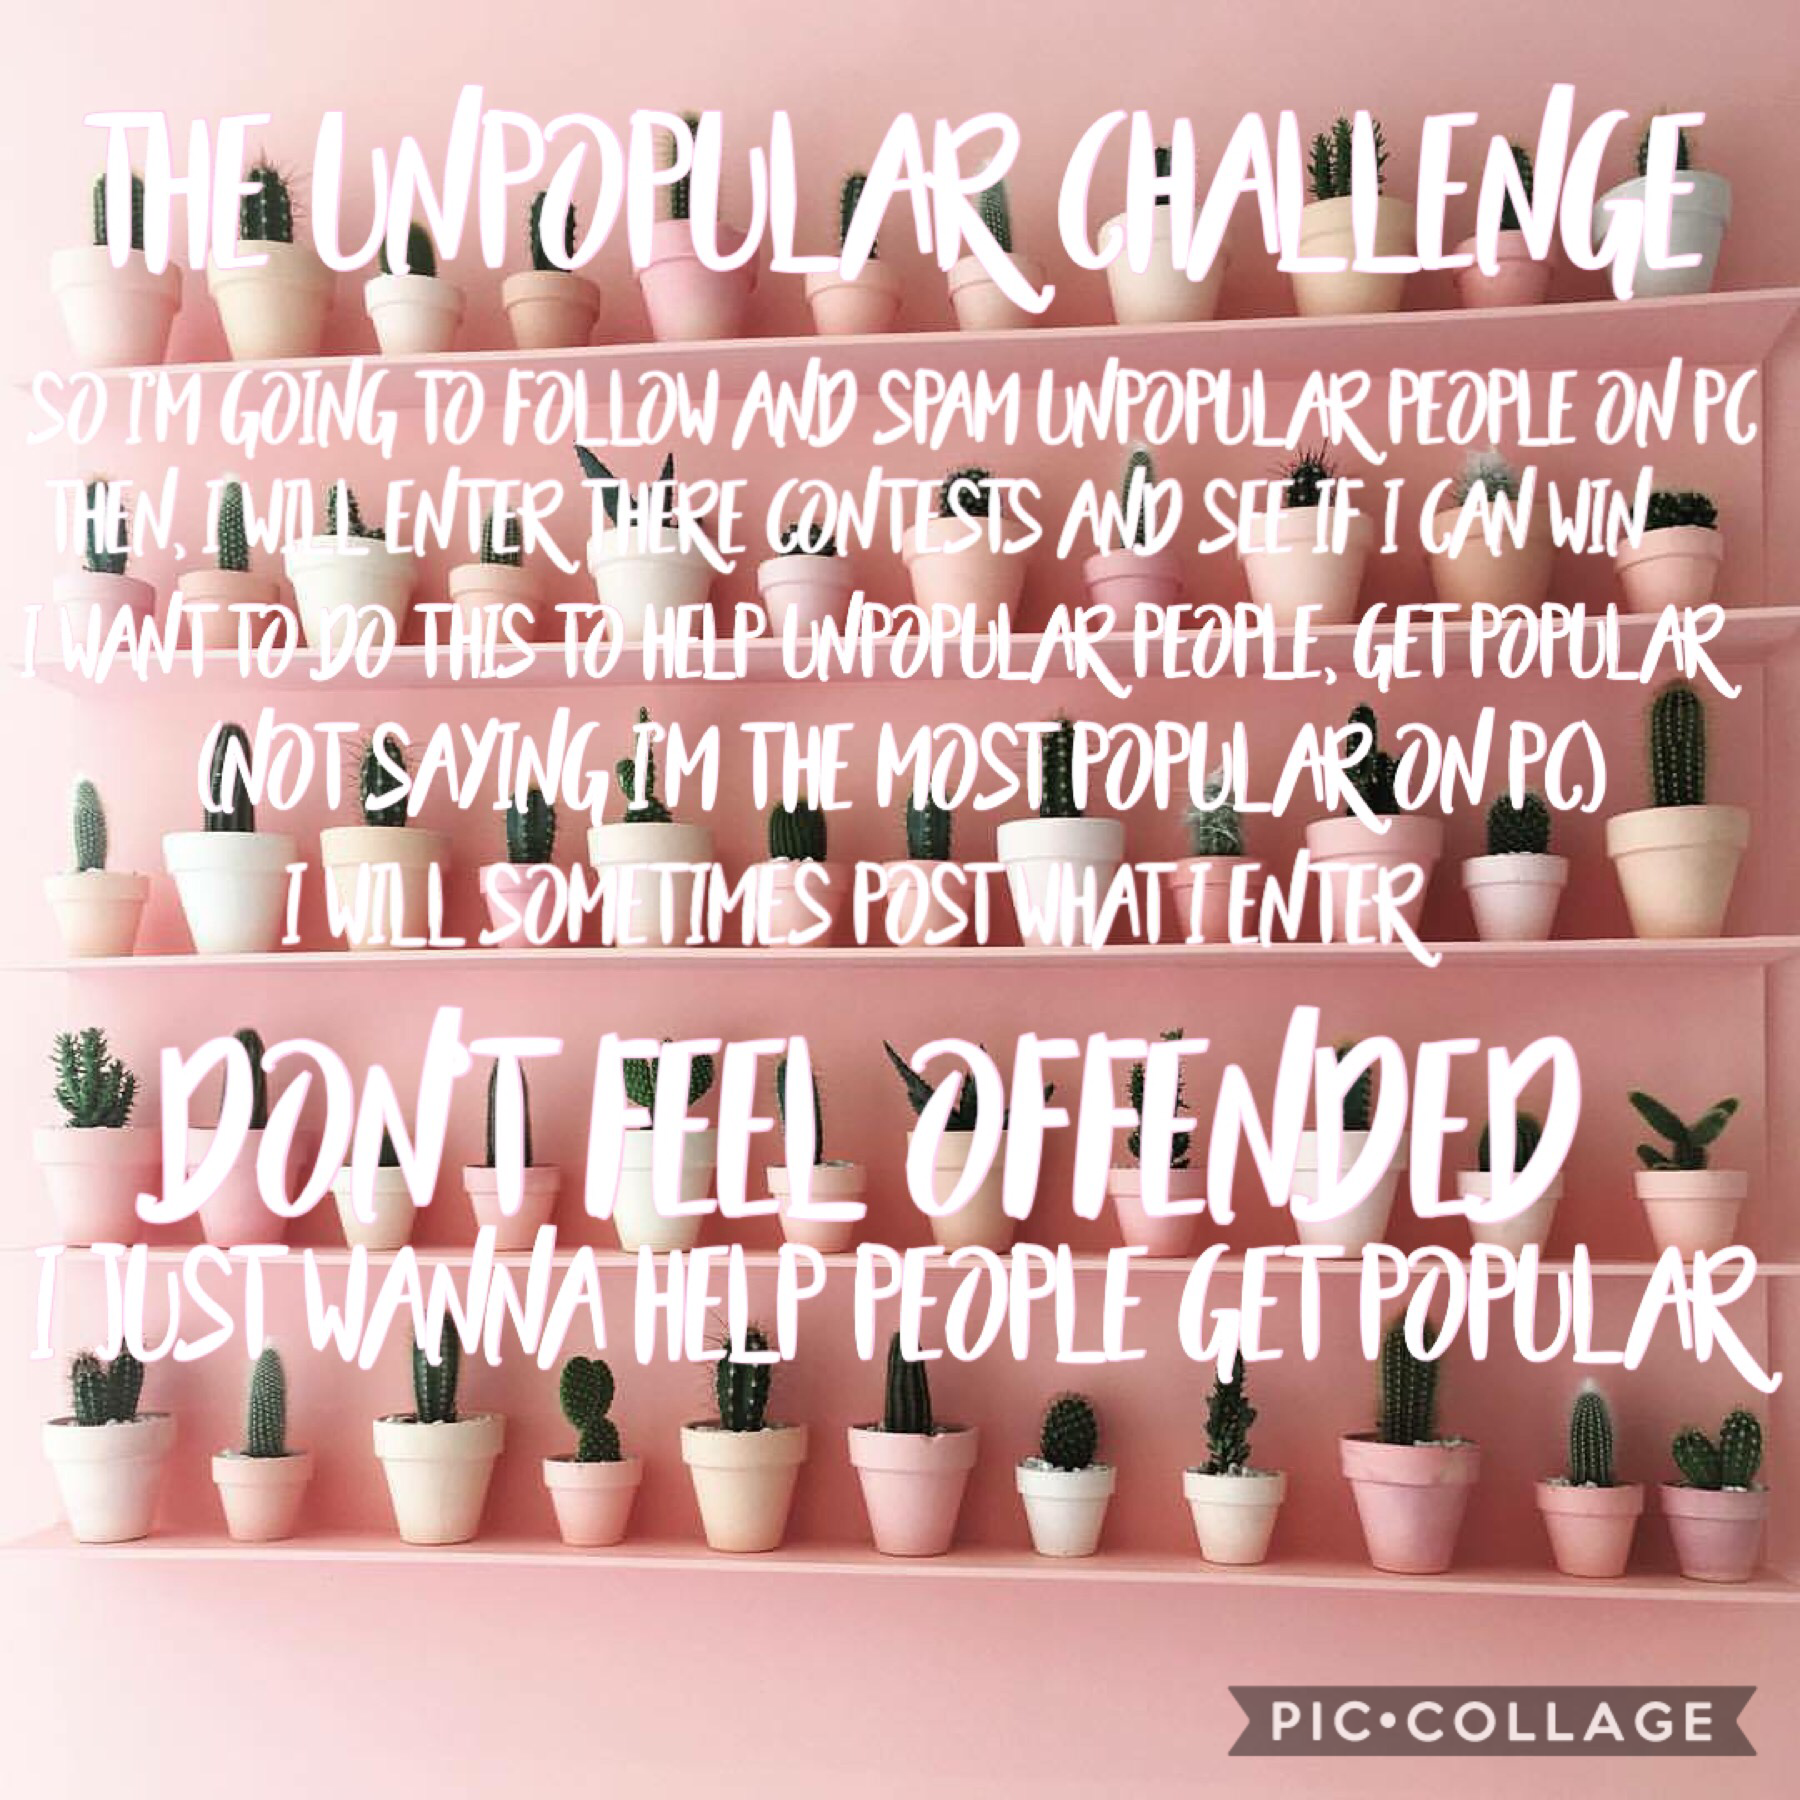 🌵tap🌵
DON’T GET OFFENDED!!!